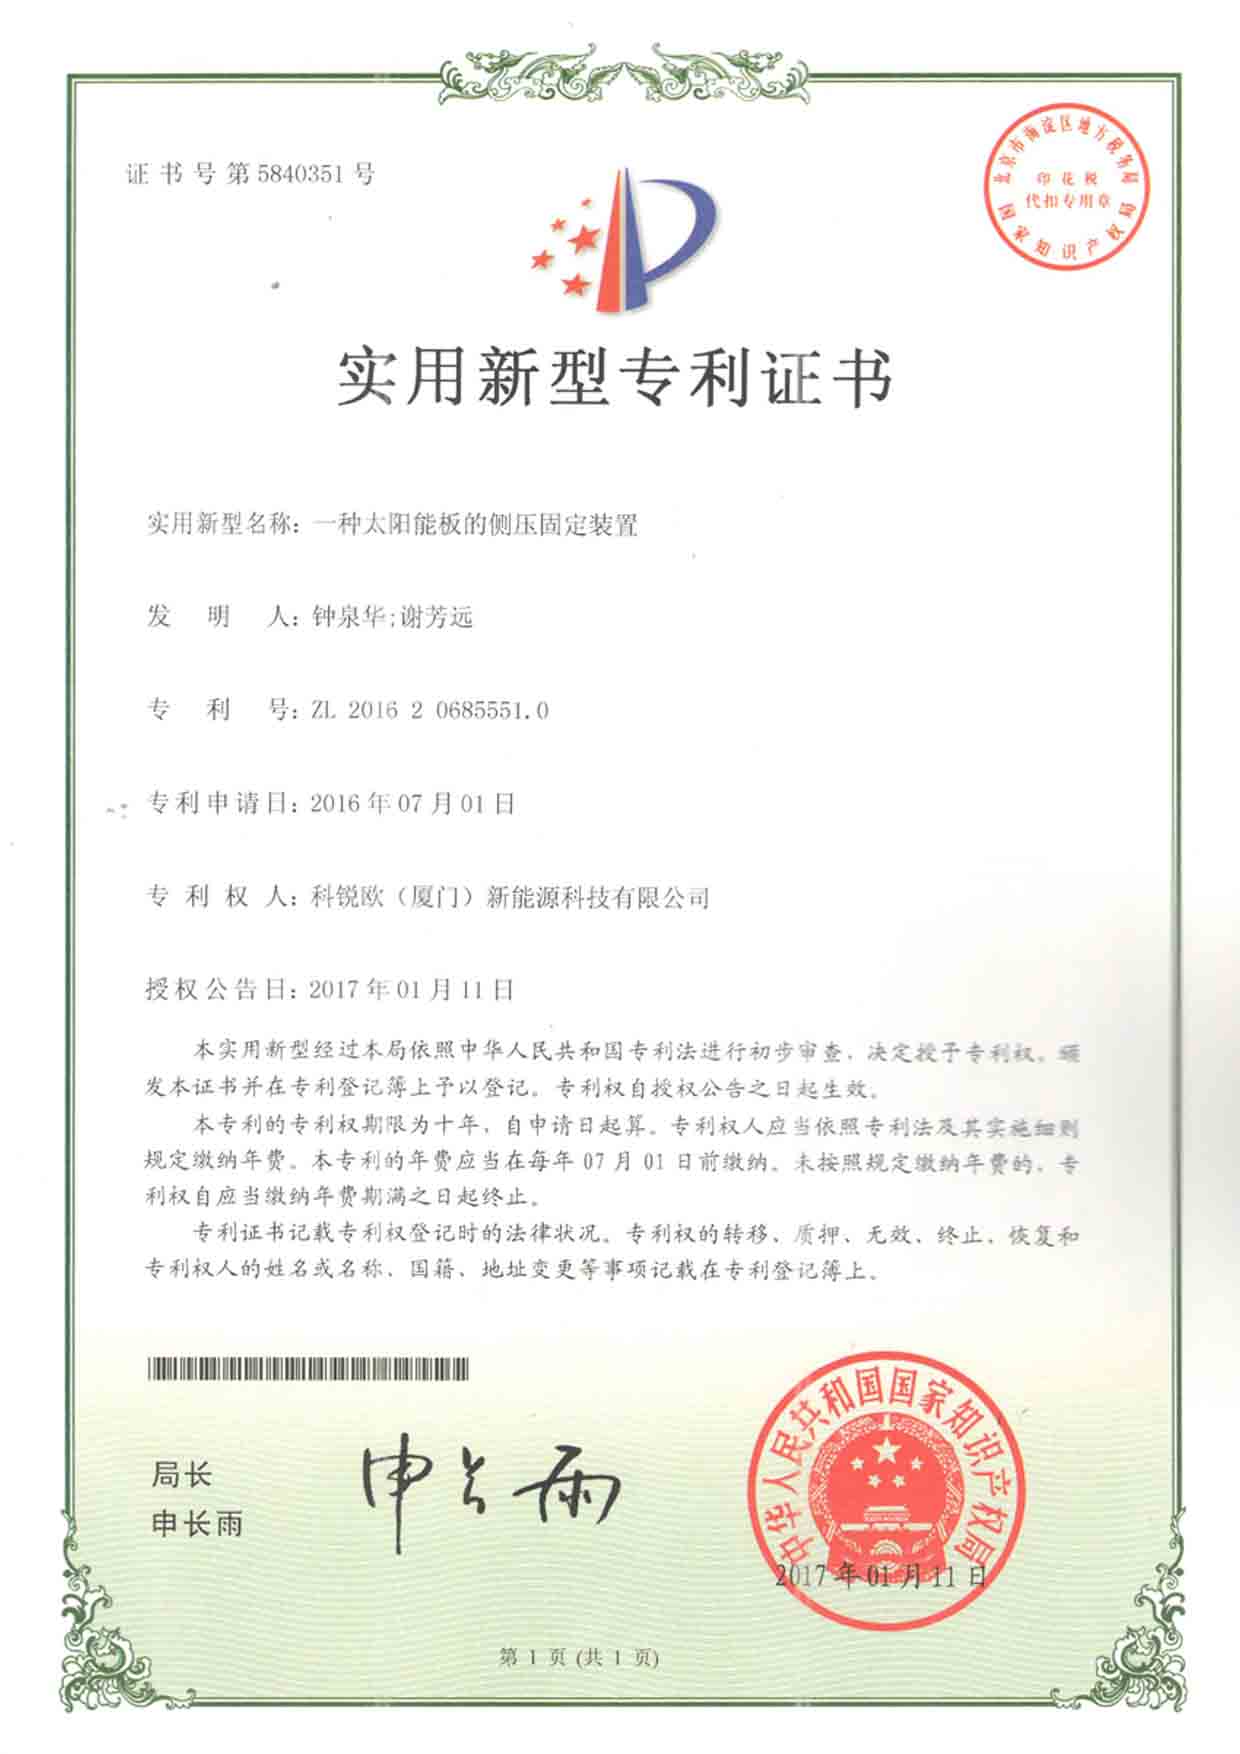 Patent5 certification for solar mounting system corigy